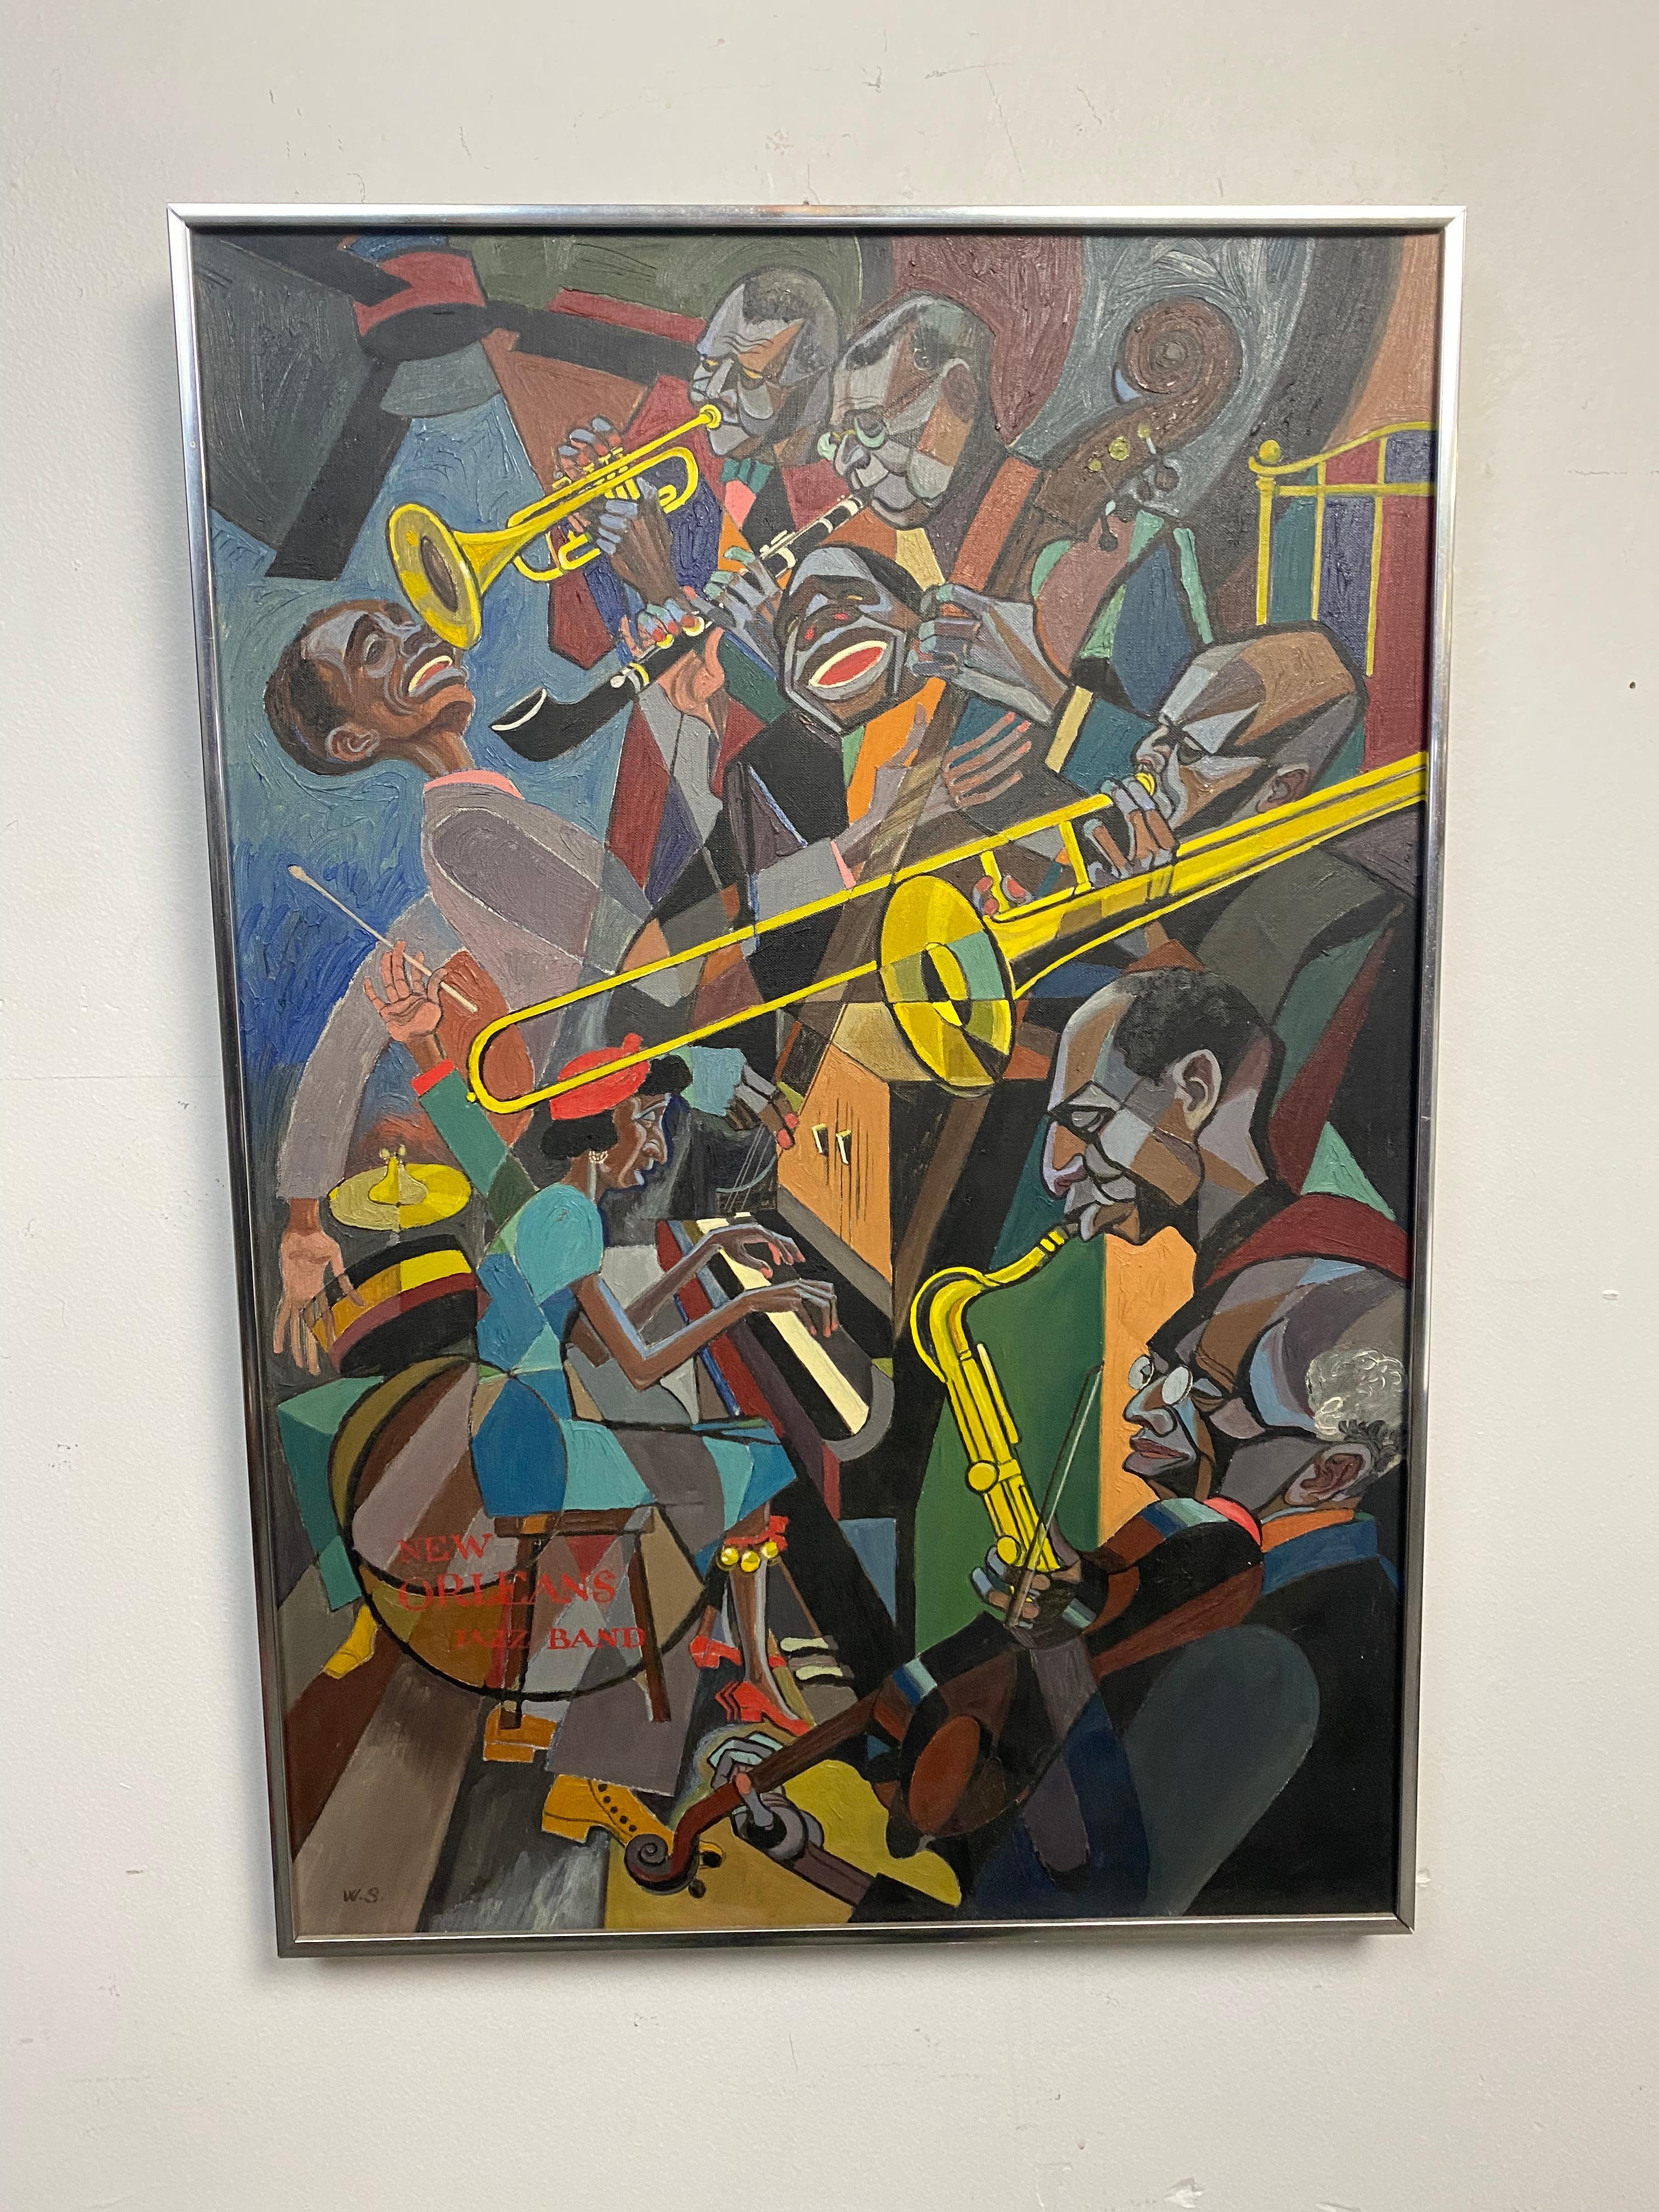 Wonderful oil on canvas depicting New Orleans Jazz Band hand executed by William Sharp 1900-1961. Amazing use of color, space, texture,

William Sharp was born on June 13, 1900, in Lemberg, Austria, where he attended college and the Academy for